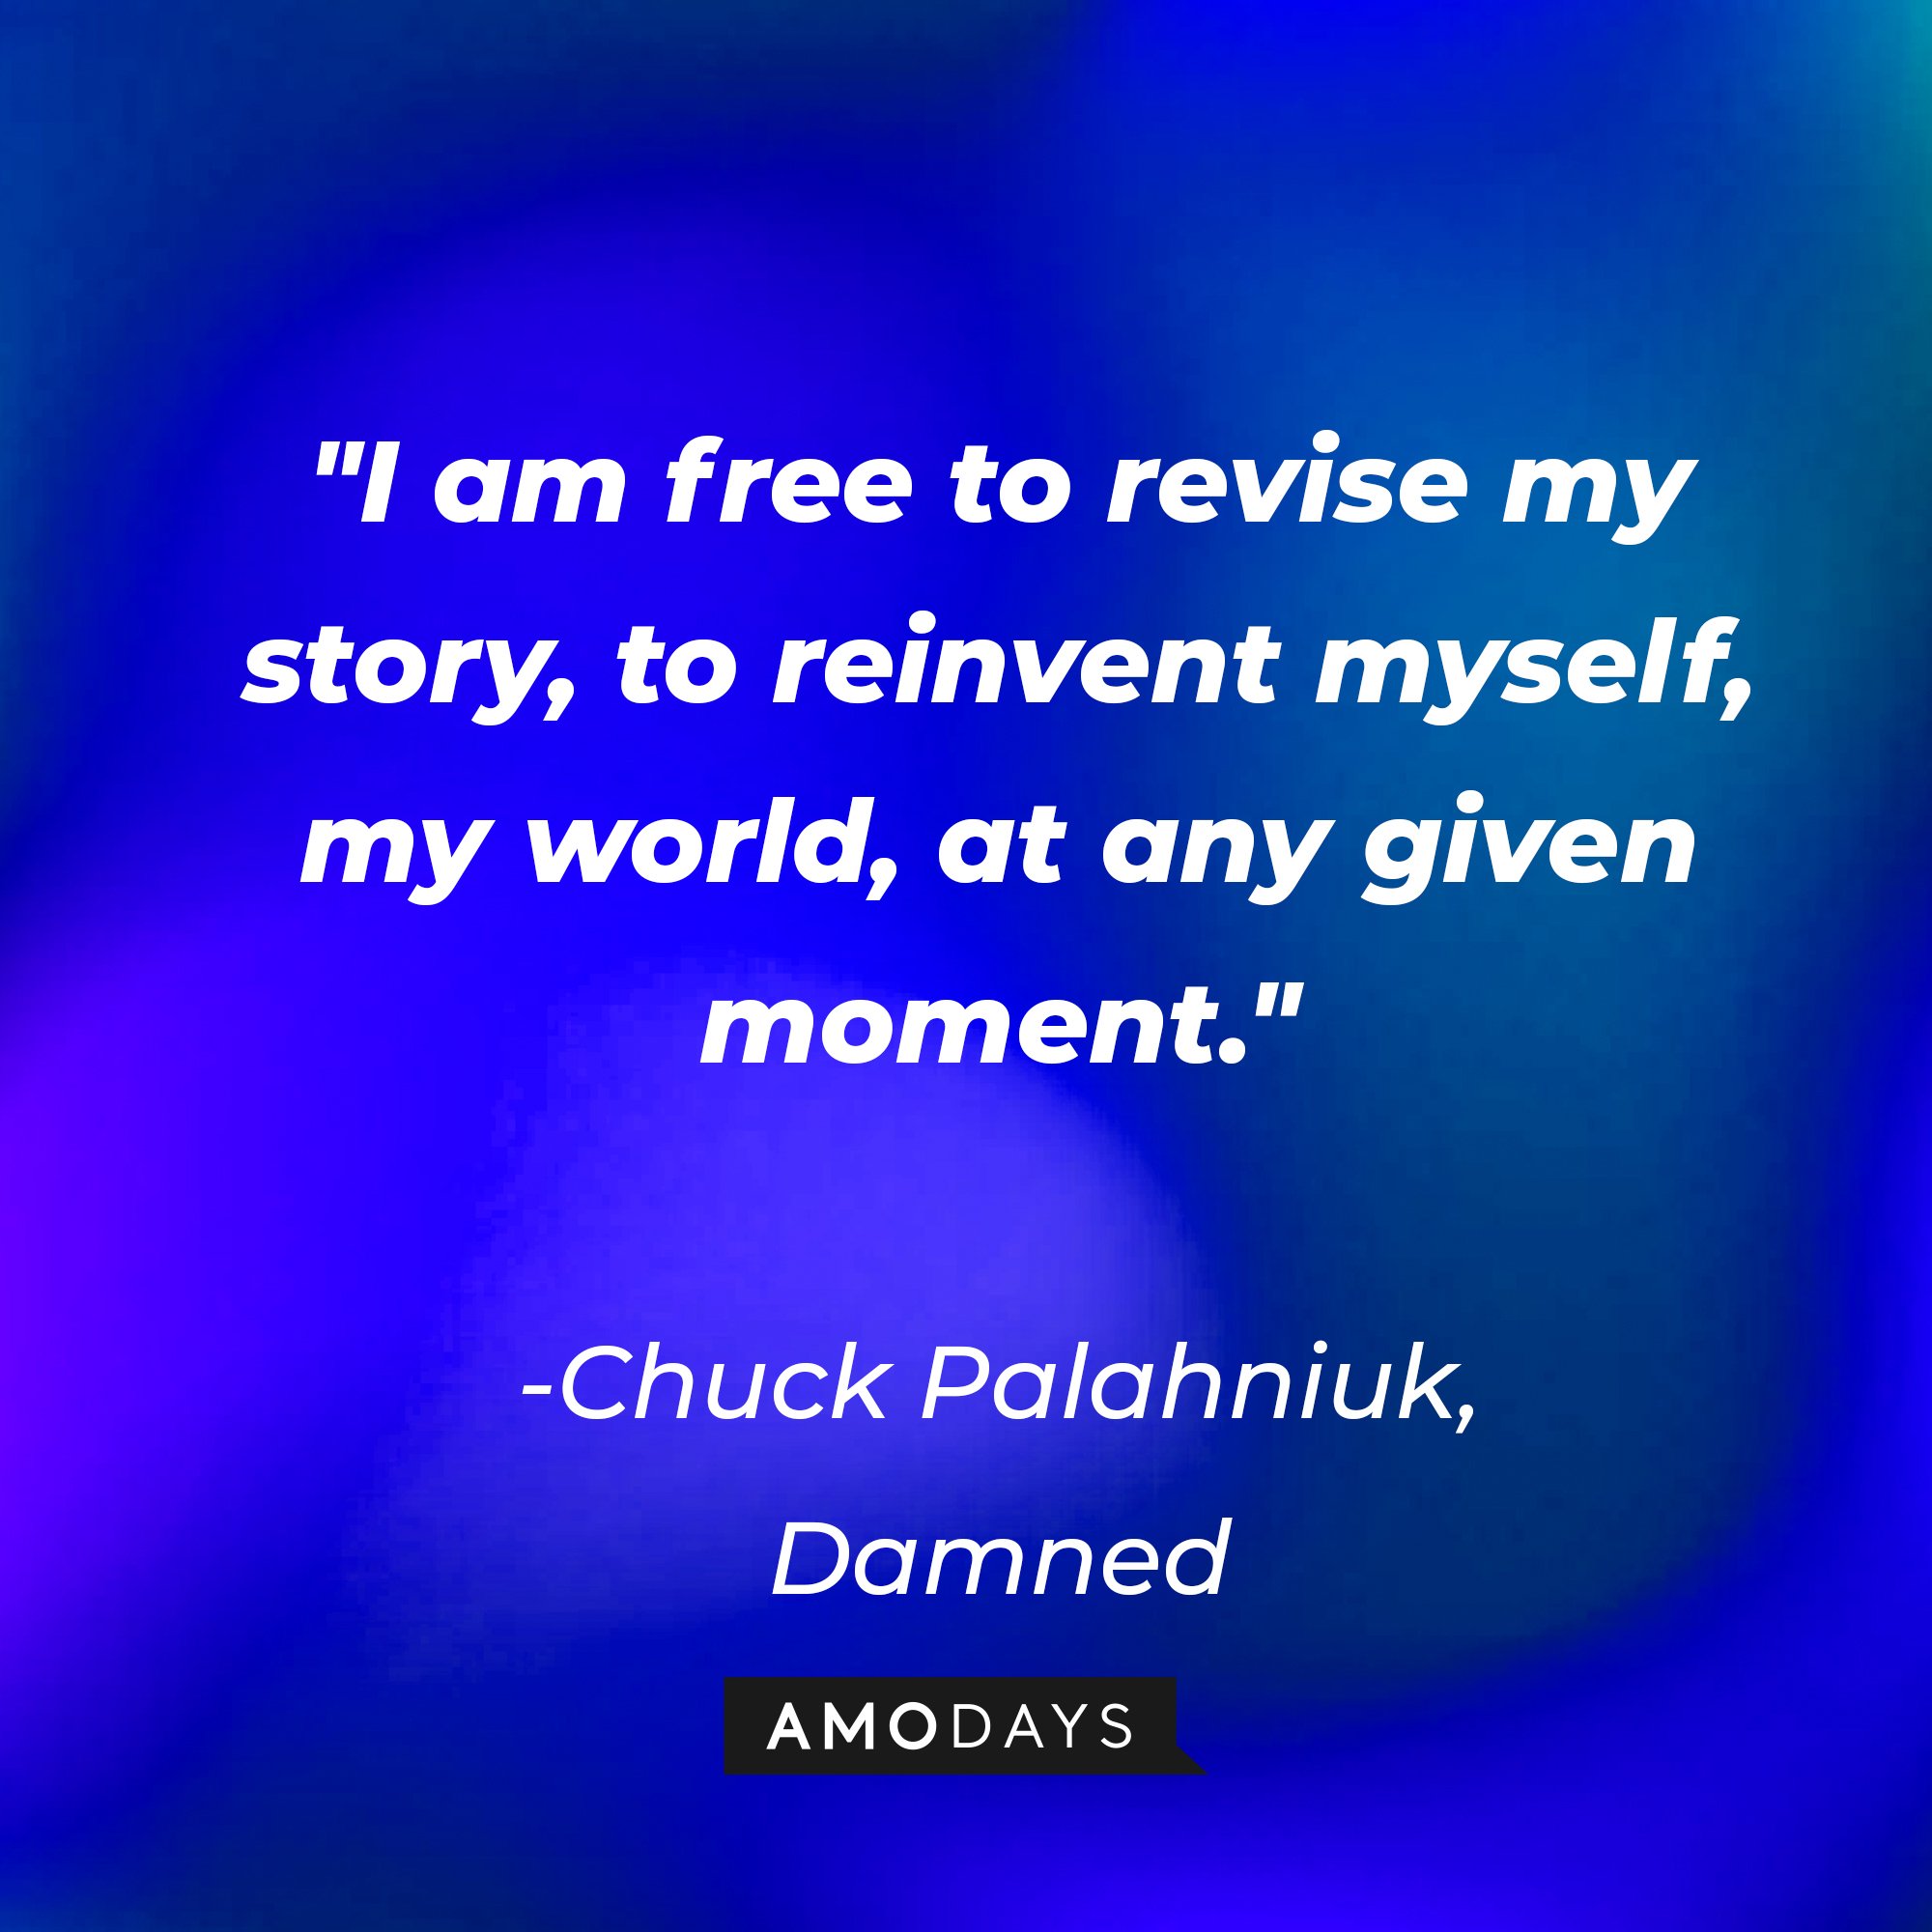 Chuck Palahniuk's quote: "I am free to revise my story, to reinvent myself, my world, at any given moment." | Image: Amodays